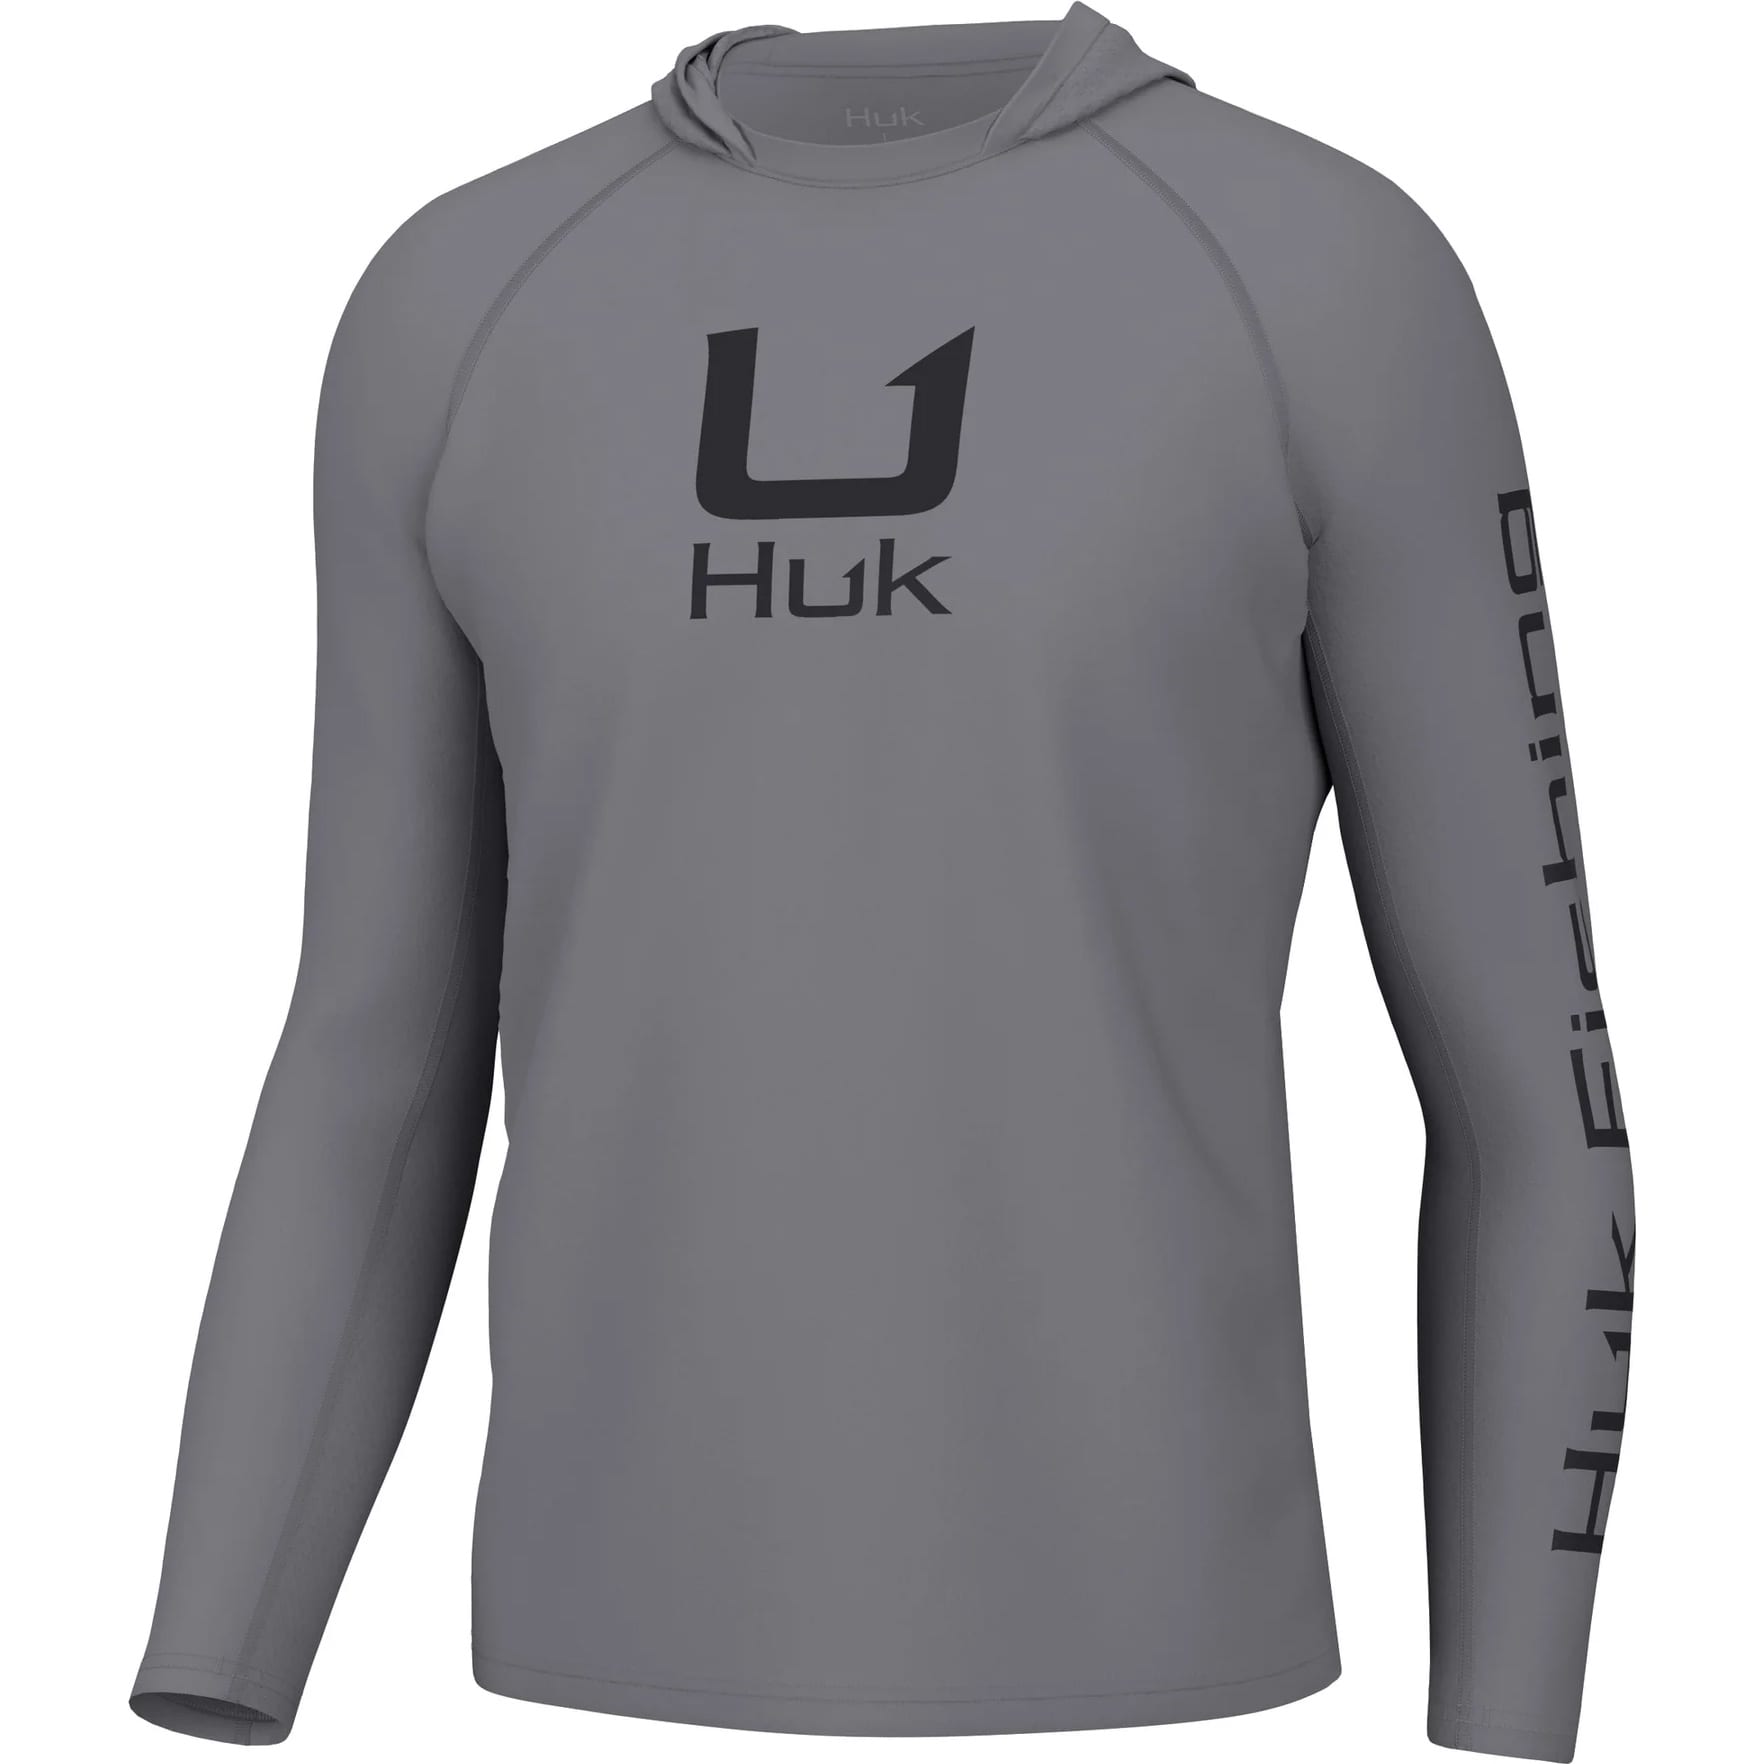 Huk Men's Icon x Hoodie - Grey - Small